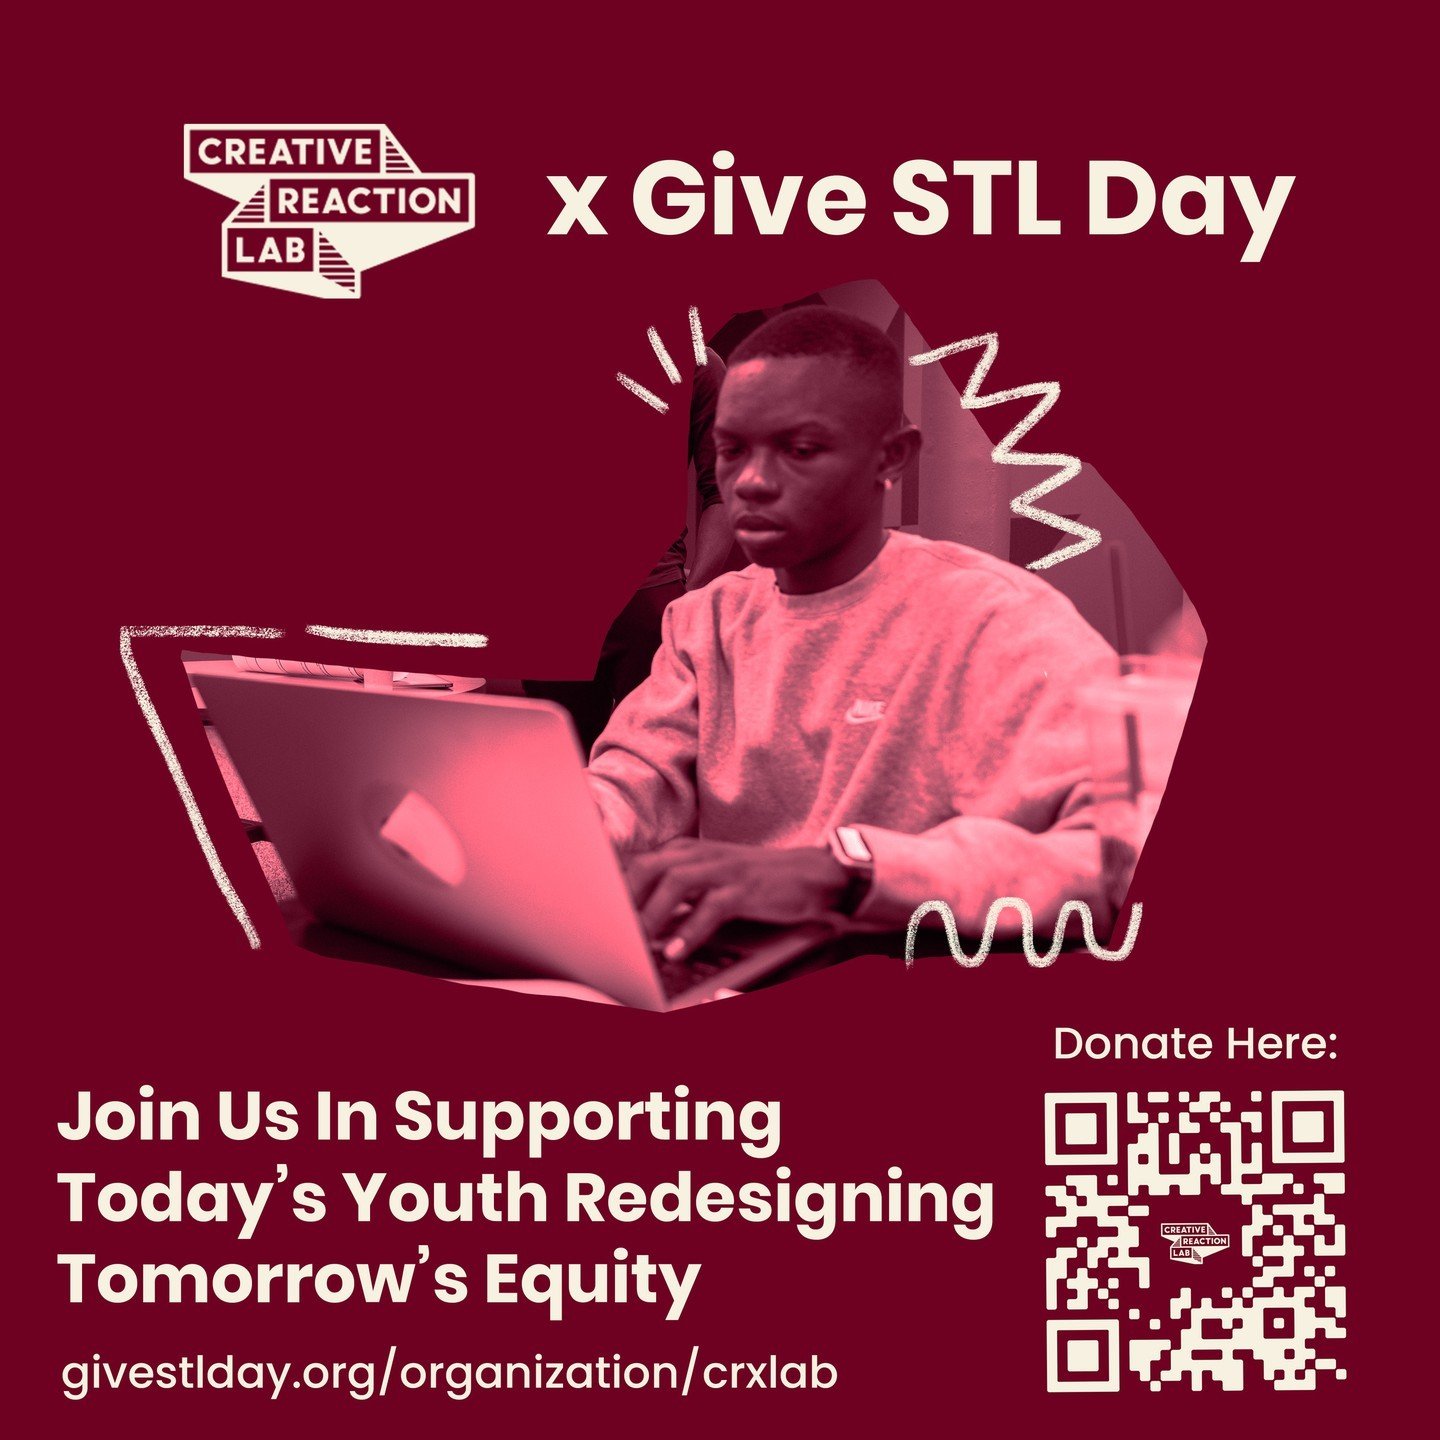 It's Give STL Day! 

Today, we have the opportunity to make a difference for young leaders in our communities. Your donation can empower them to drive positive change and create a brighter future for us all. 

Join us in supporting the Young Leaders 